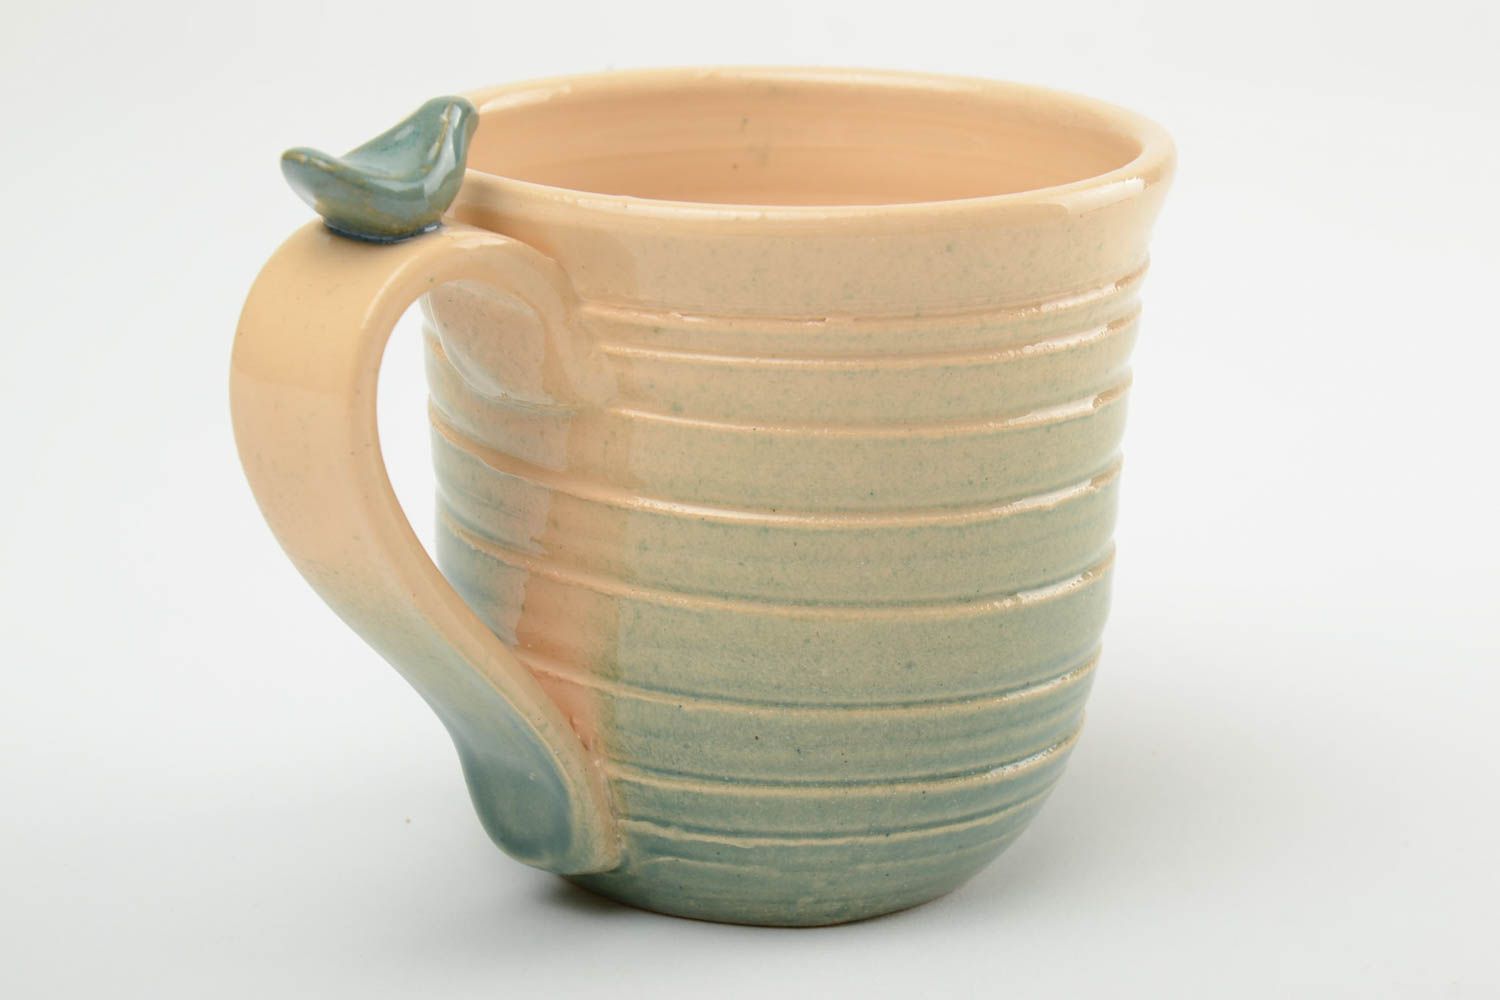 10 oz porcelain ceramic drinking cup in yellow and light blue color with handle. Great gift for a girl.  photo 4